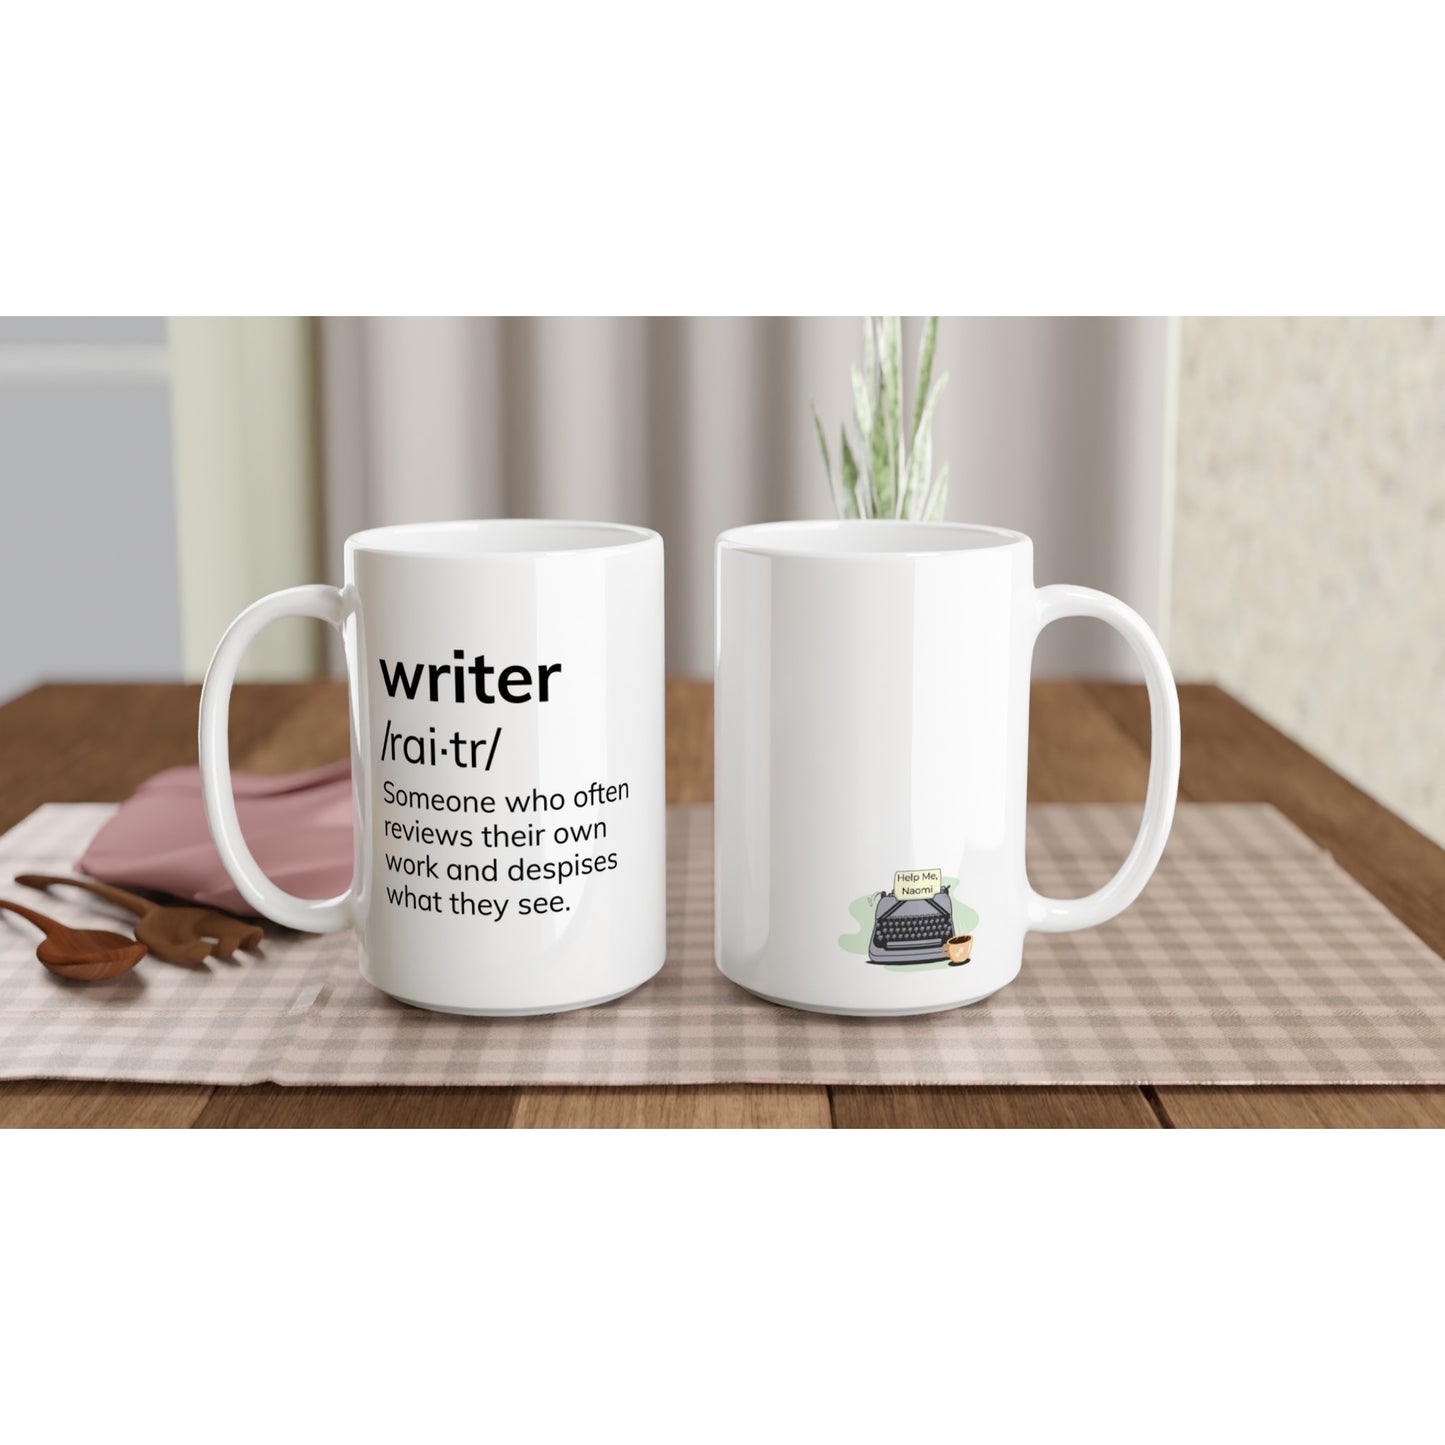 Writing-Related Coffee Mug // Writer: Someone who often reviews their own work and despises what they see.